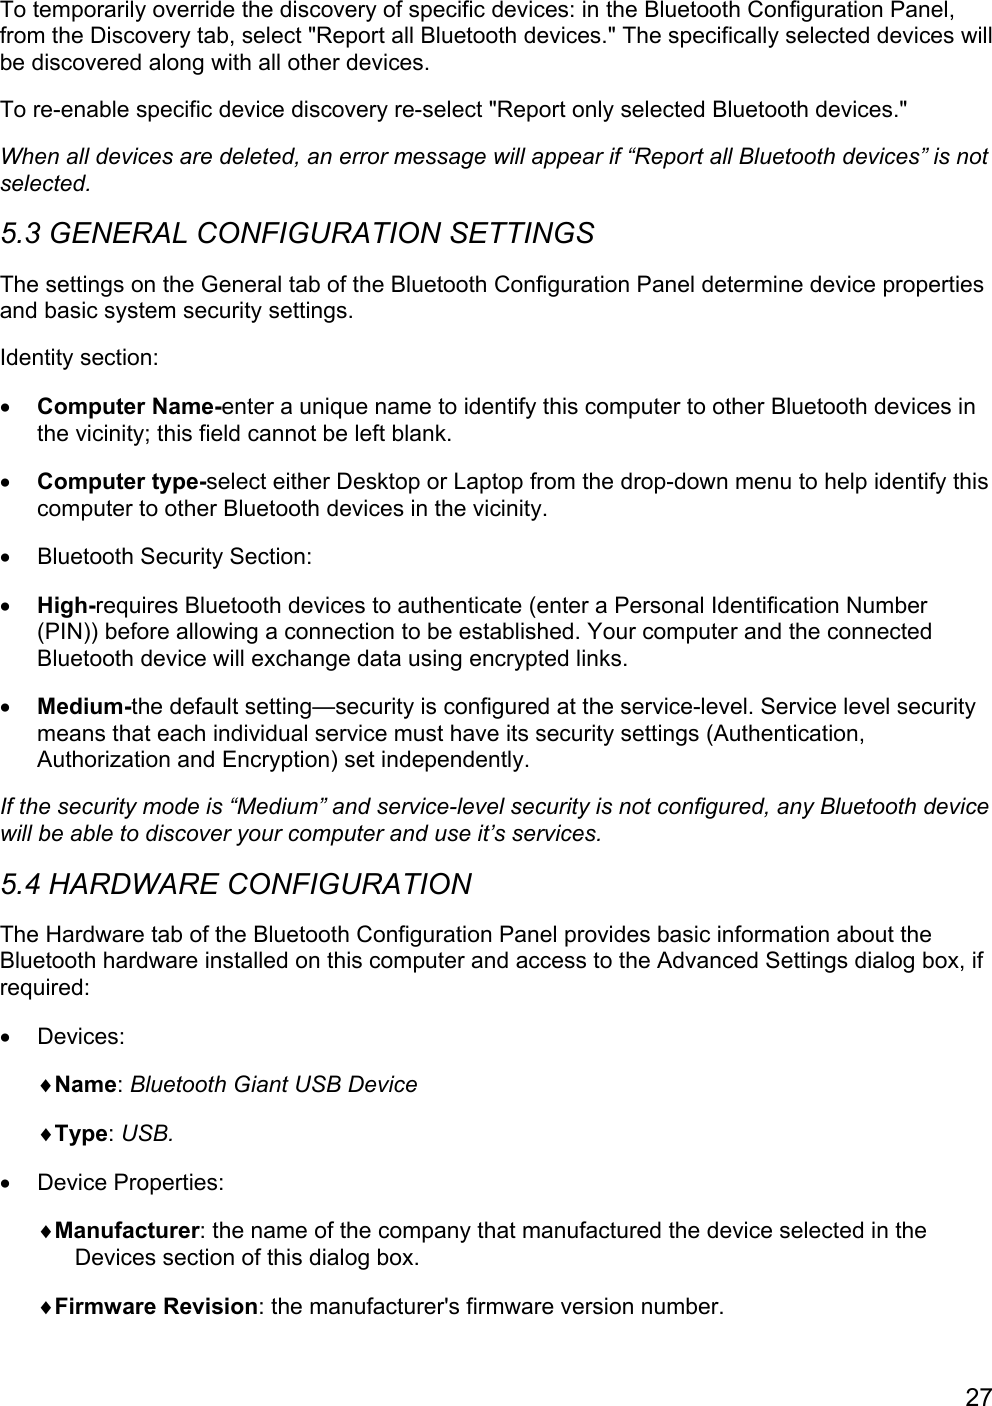 27To temporarily override the discovery of specific devices: in the Bluetooth Configuration Panel,from the Discovery tab, select &quot;Report all Bluetooth devices.&quot; The specifically selected devices willbe discovered along with all other devices.To re-enable specific device discovery re-select &quot;Report only selected Bluetooth devices.&quot;When all devices are deleted, an error message will appear if “Report all Bluetooth devices” is notselected.5.3 GENERAL CONFIGURATION SETTINGSThe settings on the General tab of the Bluetooth Configuration Panel determine device propertiesand basic system security settings.Identity section:• Computer Name-enter a unique name to identify this computer to other Bluetooth devices inthe vicinity; this field cannot be left blank.• Computer type-select either Desktop or Laptop from the drop-down menu to help identify thiscomputer to other Bluetooth devices in the vicinity.•  Bluetooth Security Section:• High-requires Bluetooth devices to authenticate (enter a Personal Identification Number(PIN)) before allowing a connection to be established. Your computer and the connectedBluetooth device will exchange data using encrypted links.• Medium-the default setting—security is configured at the service-level. Service level securitymeans that each individual service must have its security settings (Authentication,Authorization and Encryption) set independently.If the security mode is “Medium” and service-level security is not configured, any Bluetooth devicewill be able to discover your computer and use it’s services.5.4 HARDWARE CONFIGURATIONThe Hardware tab of the Bluetooth Configuration Panel provides basic information about theBluetooth hardware installed on this computer and access to the Advanced Settings dialog box, ifrequired:• Devices:♦Name: Bluetooth Giant USB Device♦Type: USB.• Device Properties:♦Manufacturer: the name of the company that manufactured the device selected in theDevices section of this dialog box.♦Firmware Revision: the manufacturer&apos;s firmware version number.